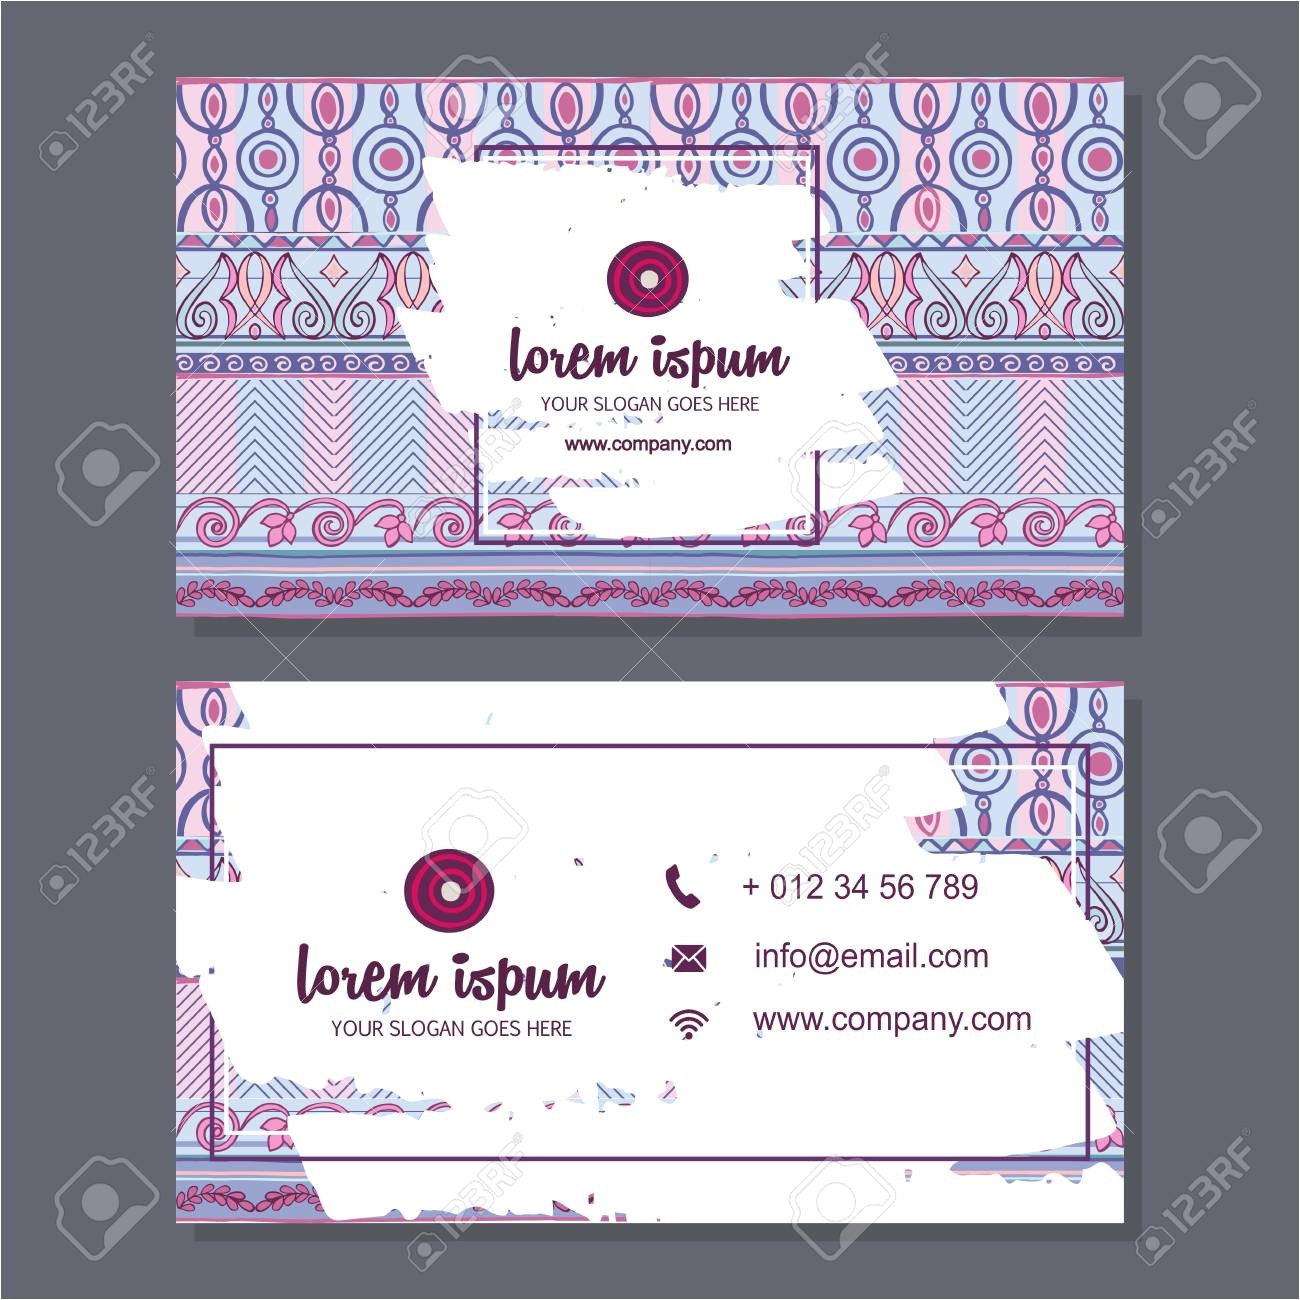 59961723 business card or visiting card template with boho style pattern background corporate identity design jpg